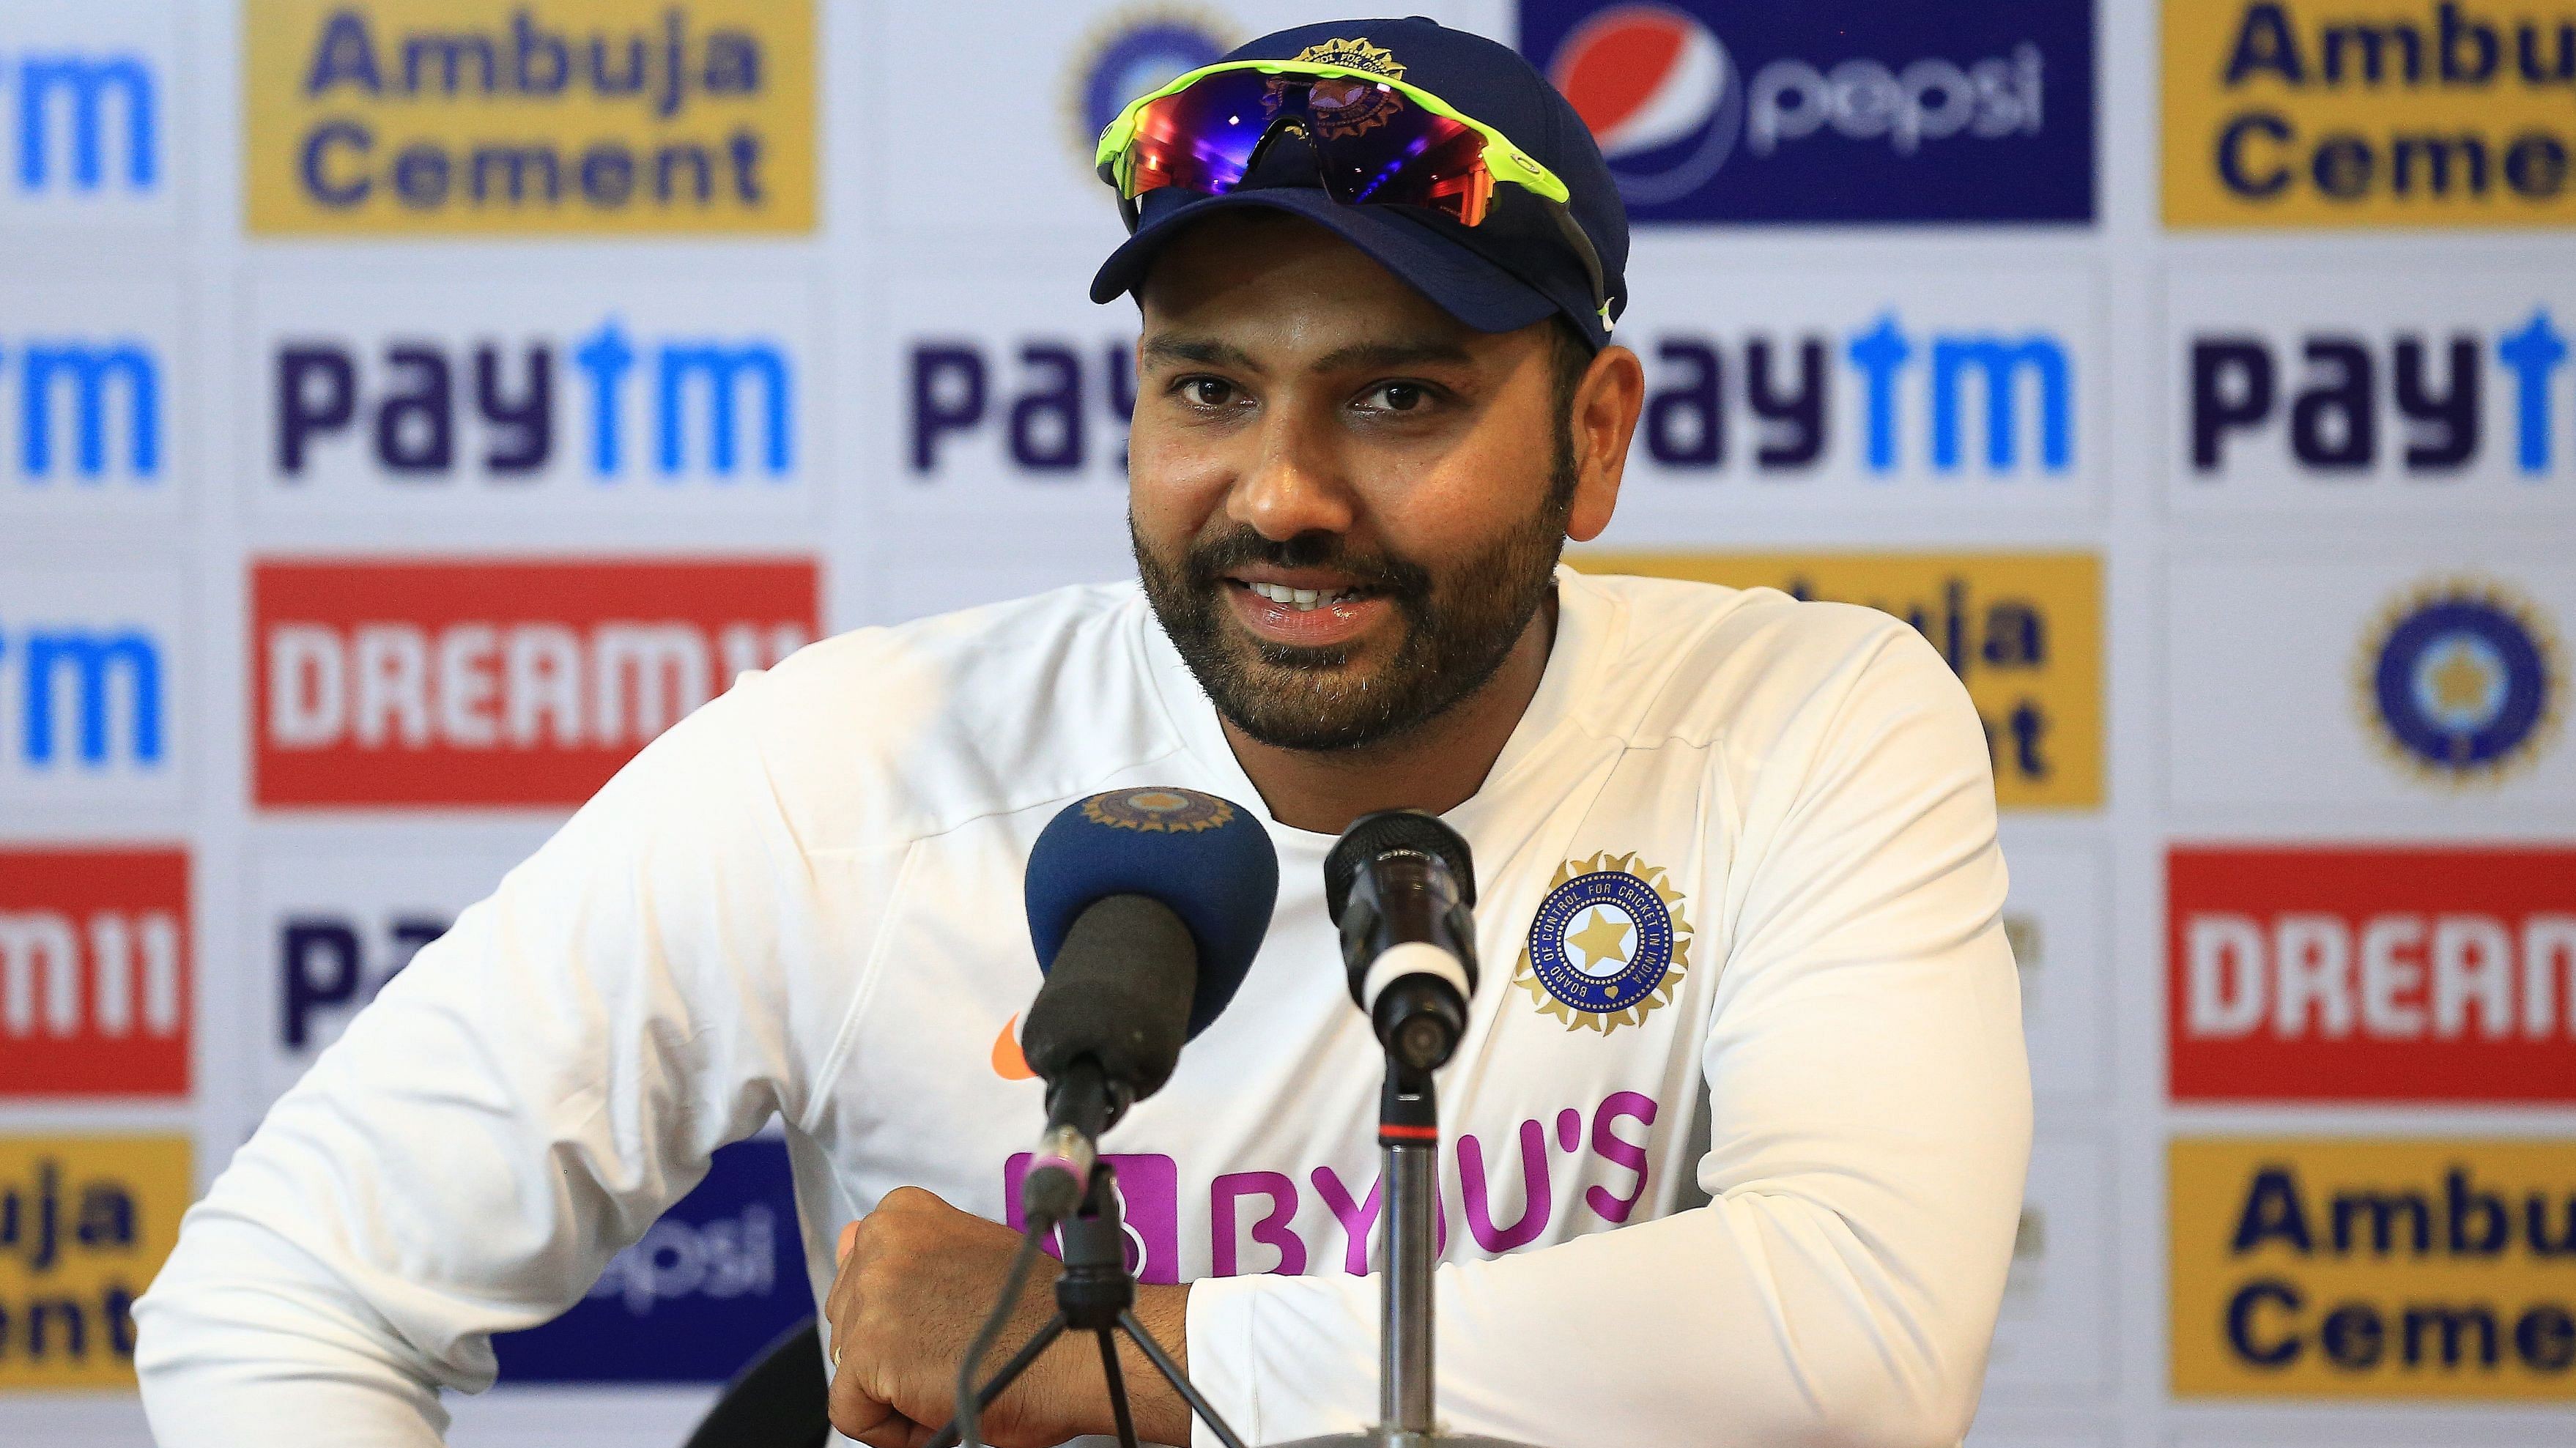 WATCH: Rohit Sharma comes up with witty response when asked why he enjoys press conferences